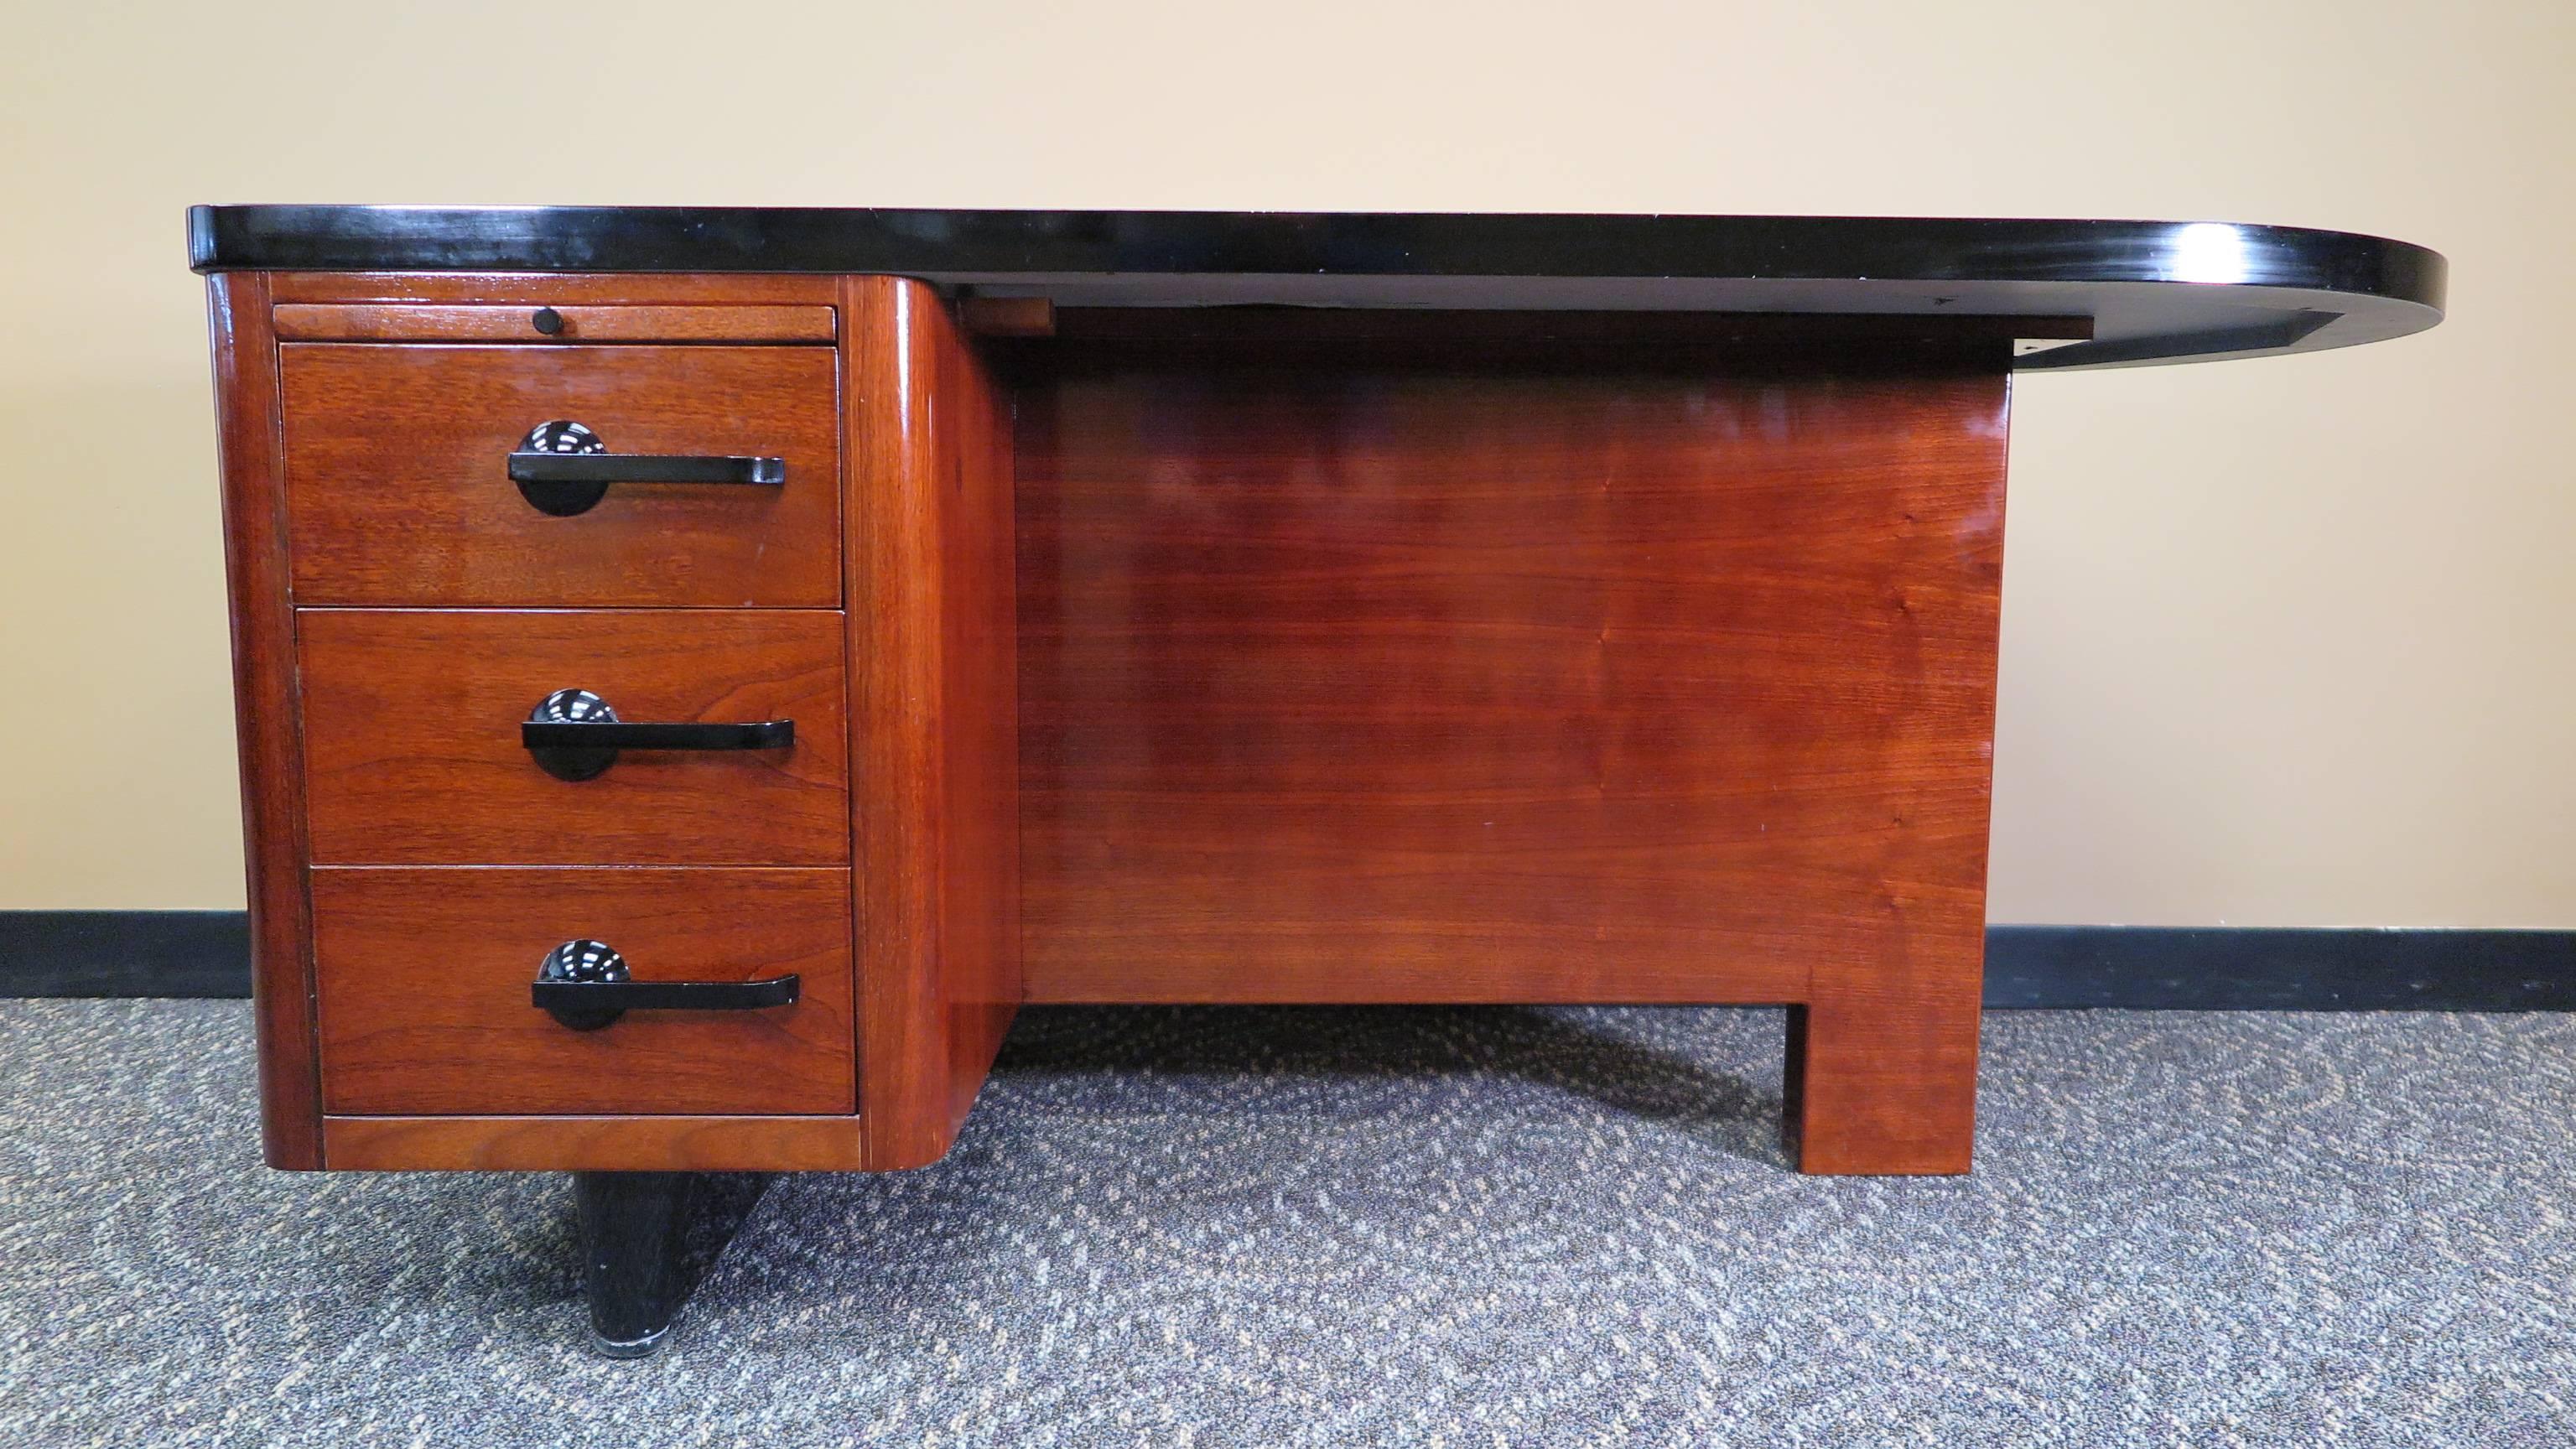 An Art Deco desk in the style of Gilbert Rhode. Mahogany Art Deco desk with arched shape top to one side. Writing platform on left side with one drawer and a file deep drawer lower.  In very good condition chair pictured is included.